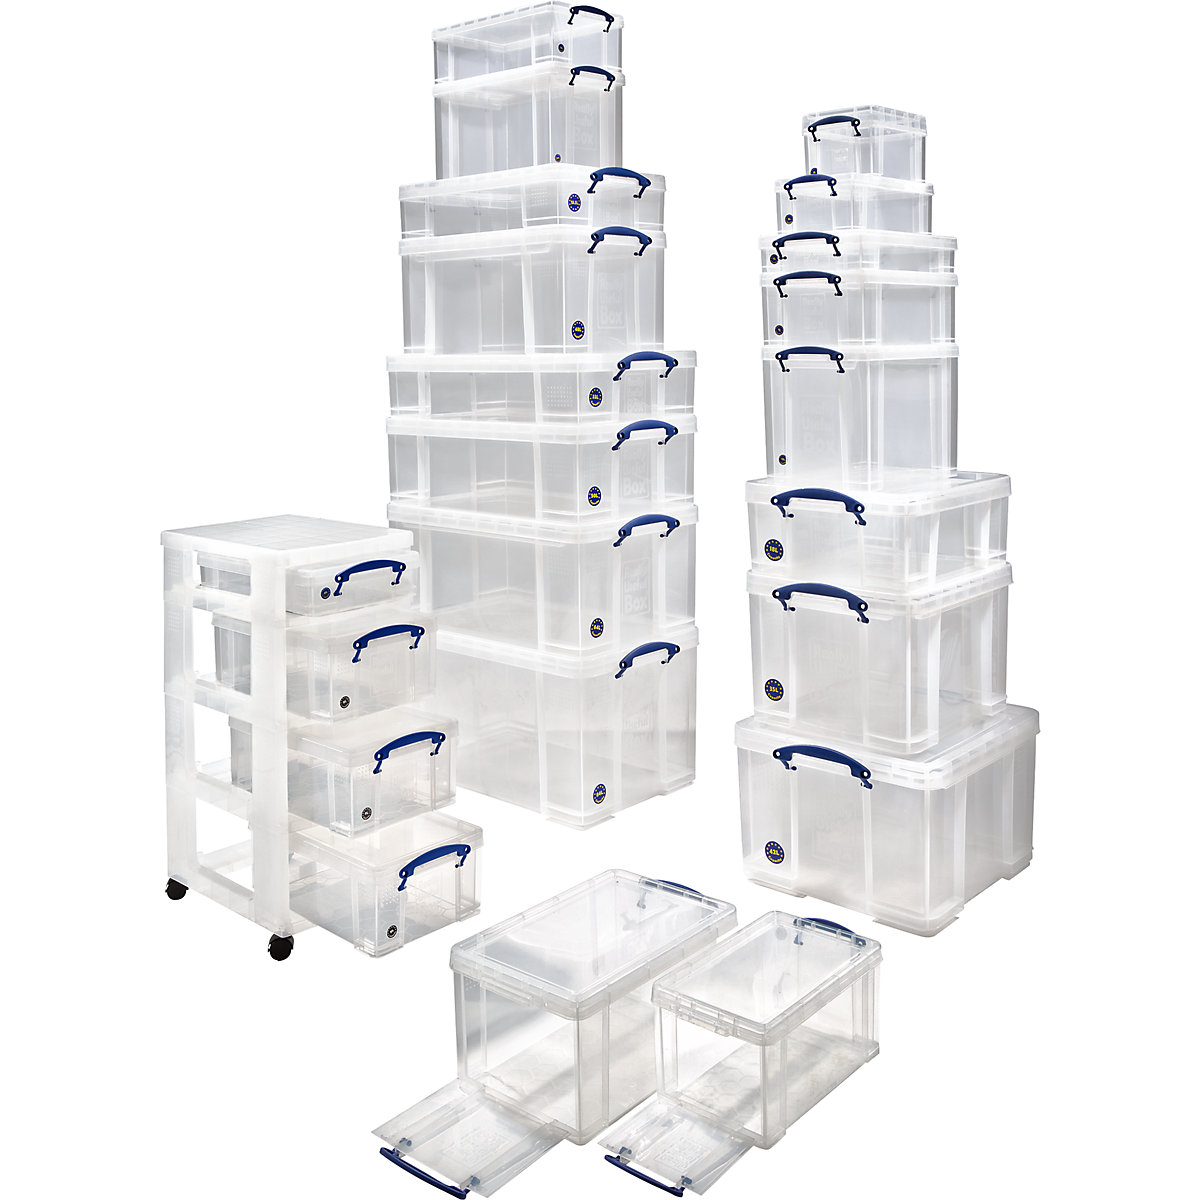 Caja apilable REALLY USEFUL (Imagen del producto 2)-1